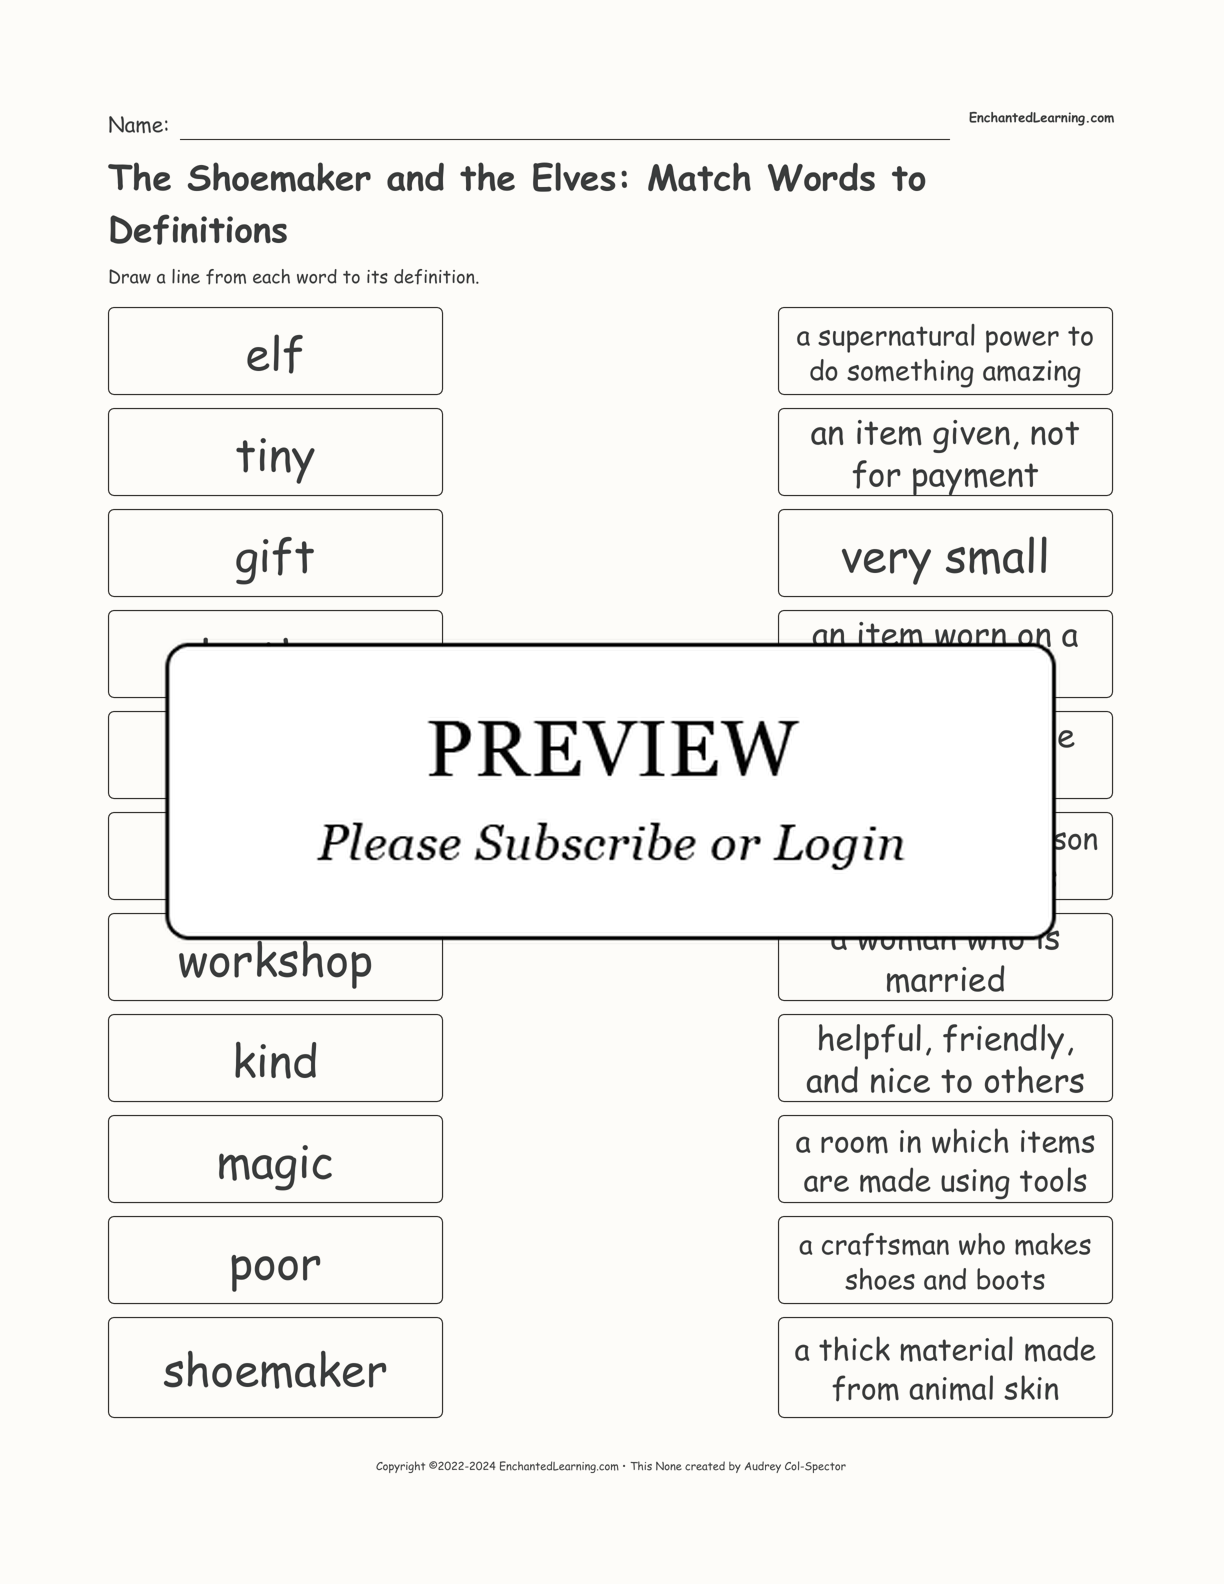 The Shoemaker and the Elves: Match Words to Definitions interactive worksheet page 1